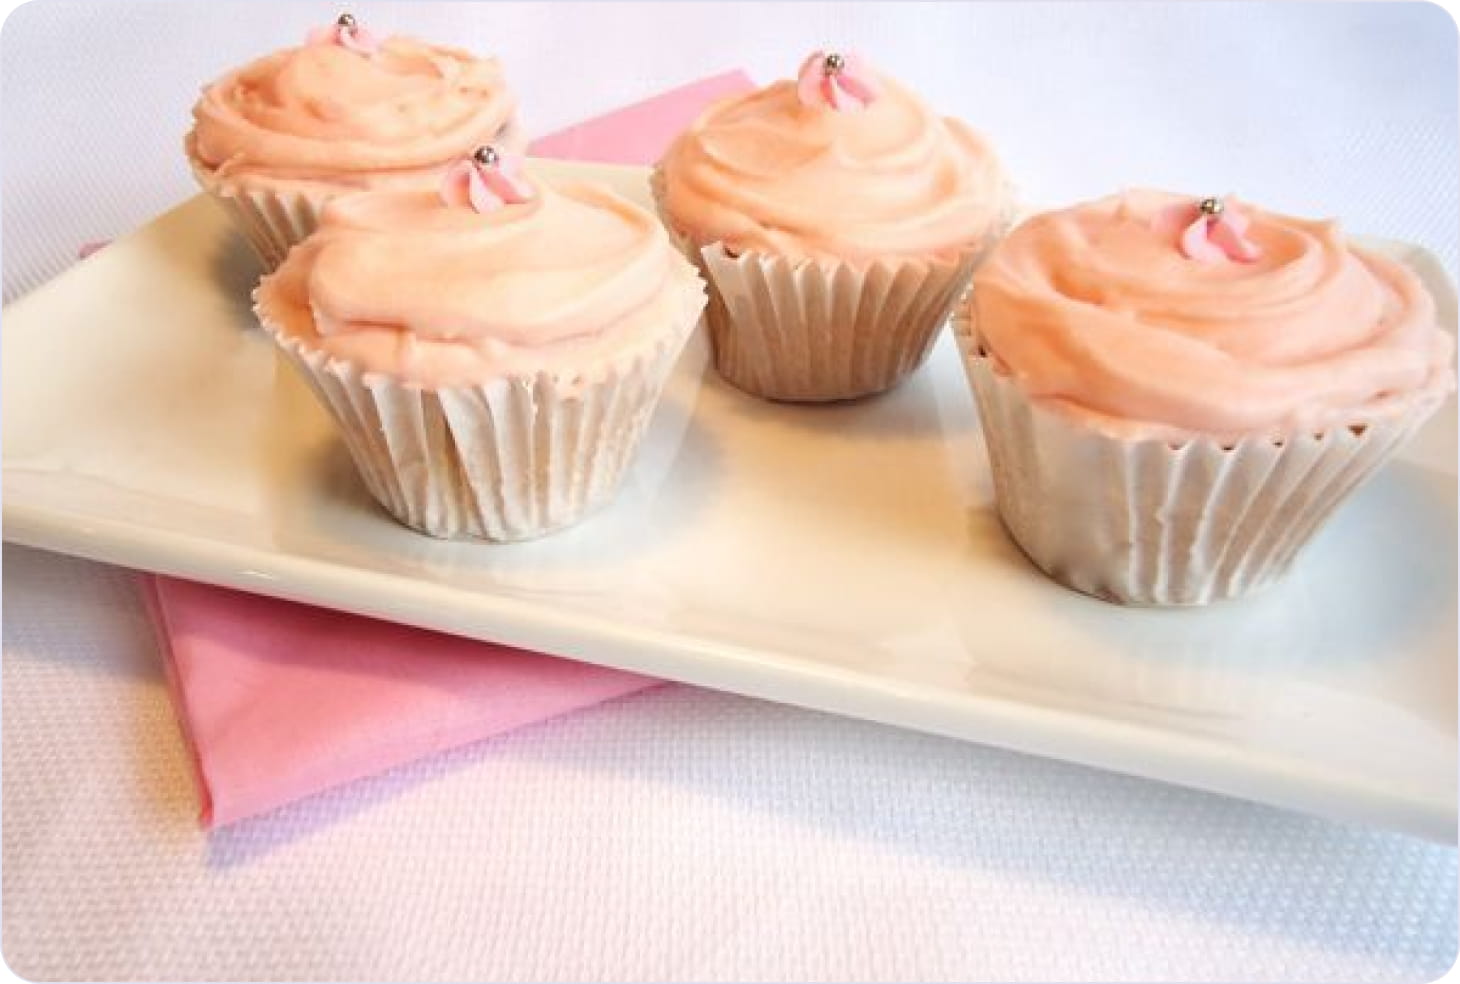 Classic Vanilla Cupcake decorated with icing